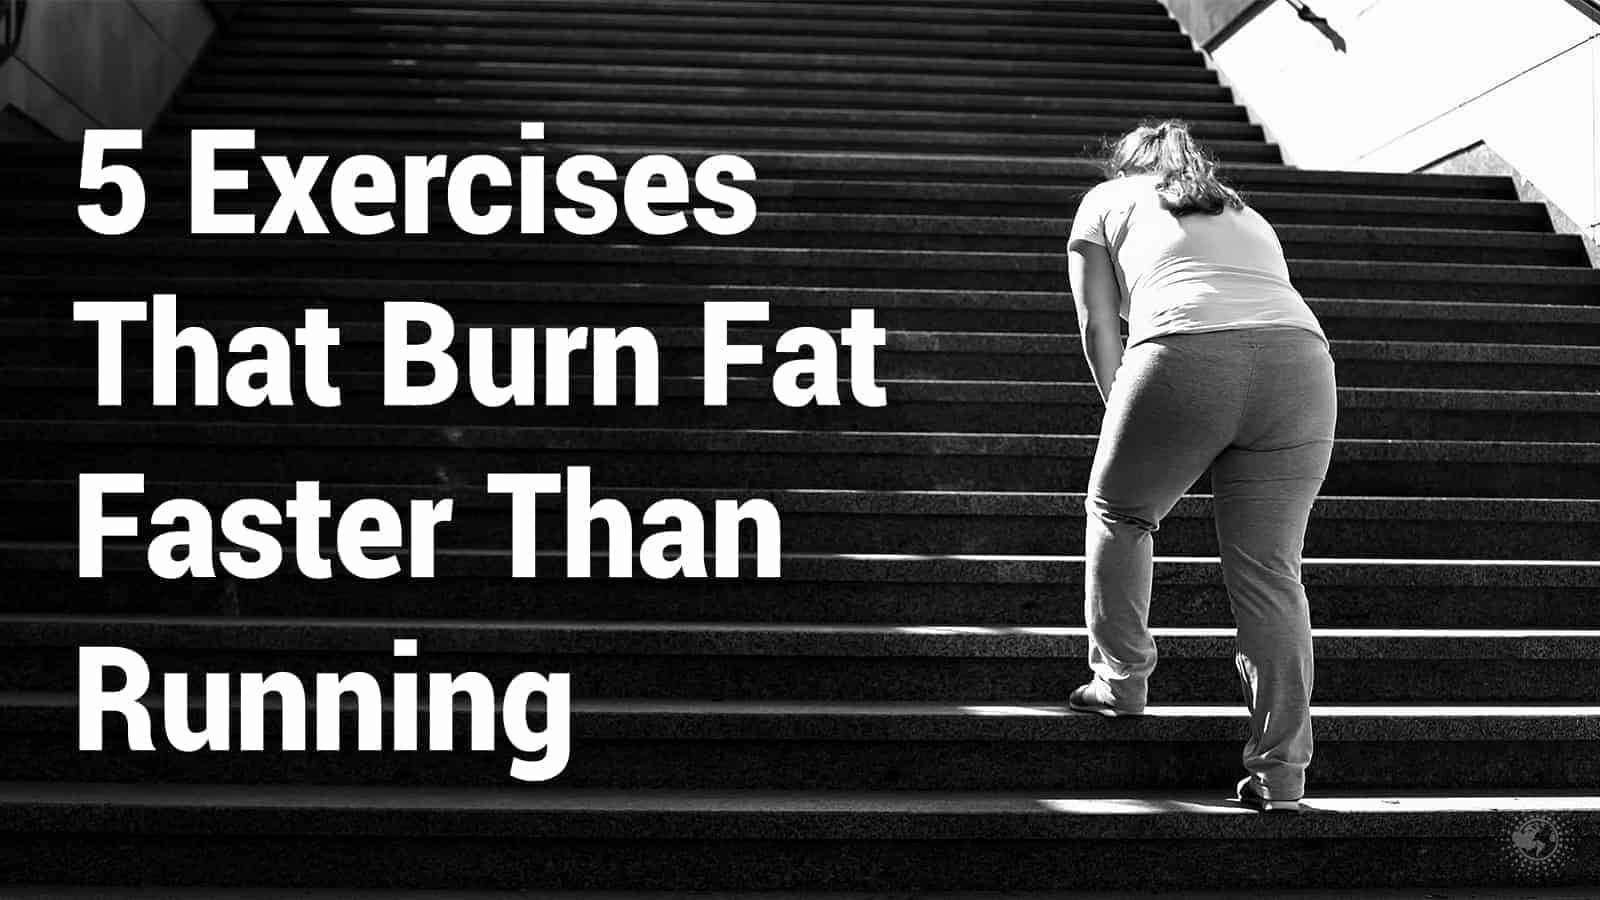 5 Exercises That Burn Fat Faster Than Running